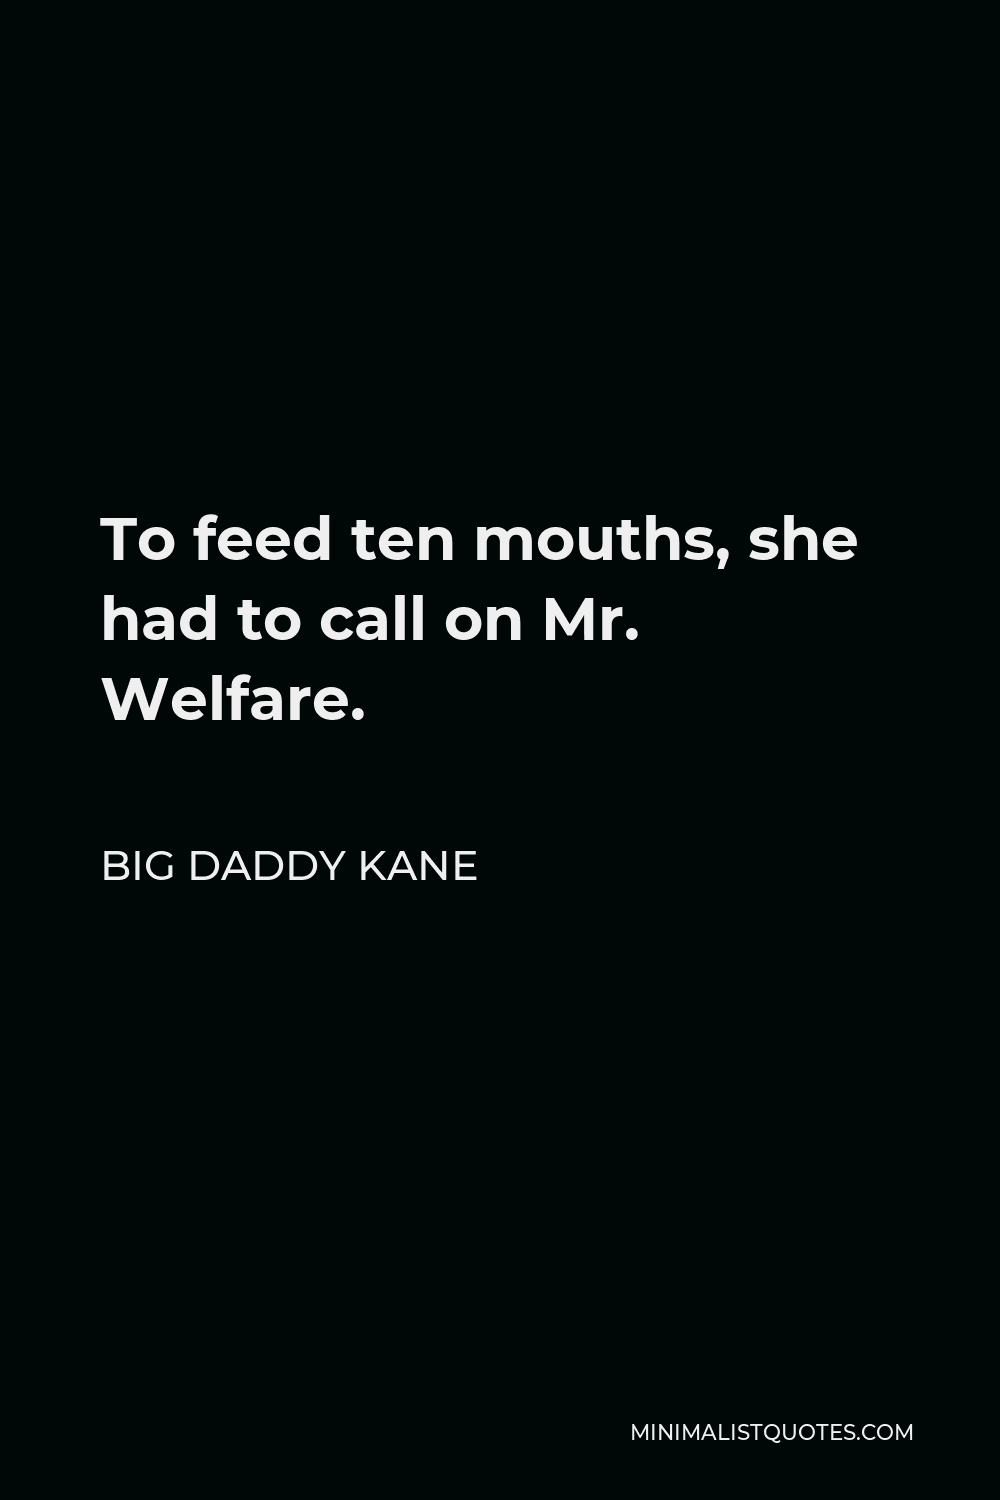 Big Daddy Kane Quote - To feed ten mouths, she had to call on Mr. Welfare.